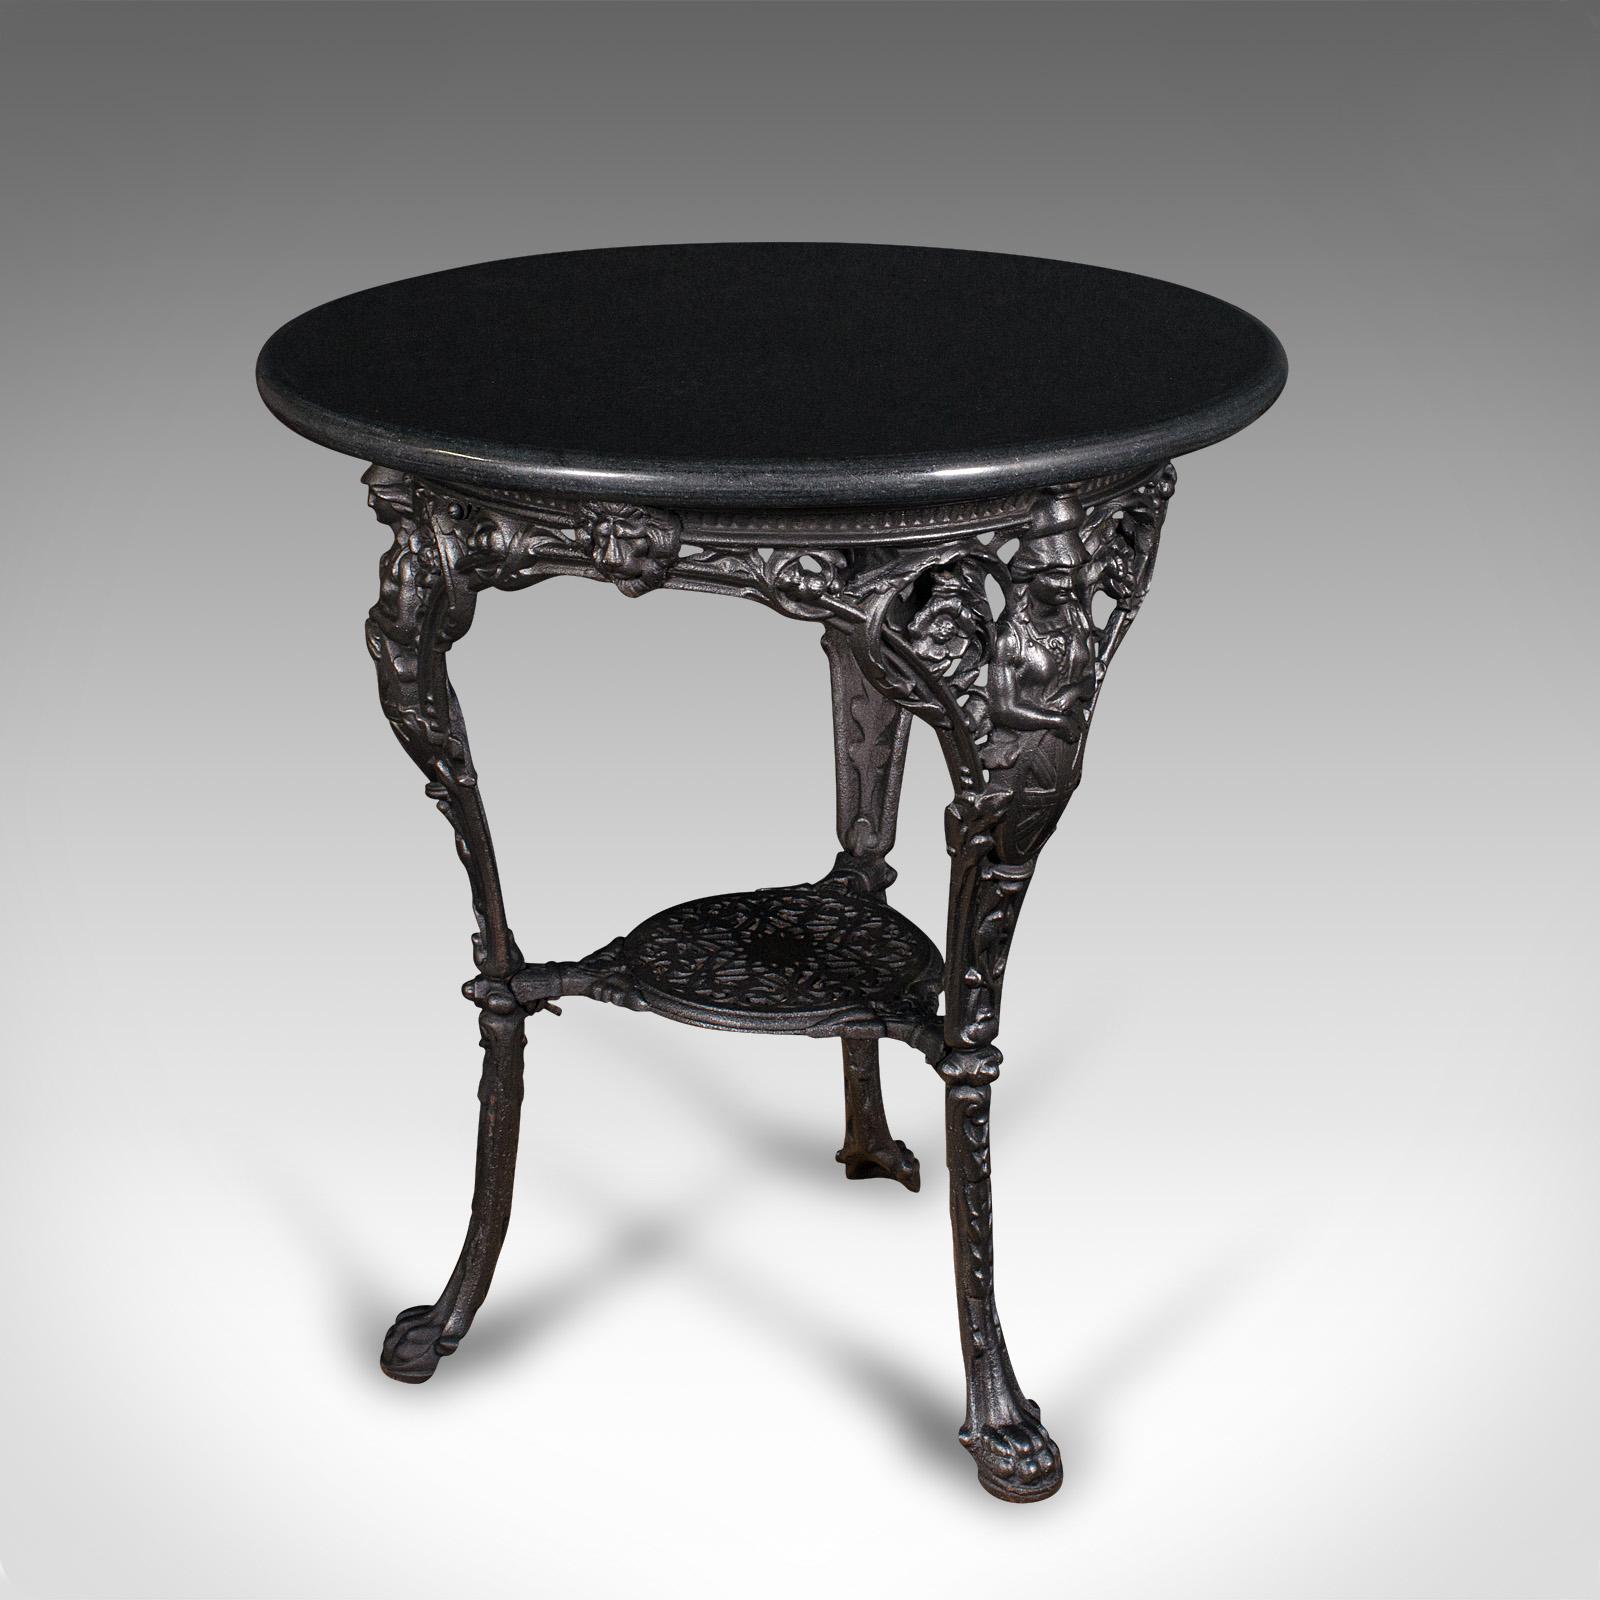 This is an antique Britannia table. An English, cast iron and marble circular wine or side table, dating to the early Victorian period, circa 1850.

Captivating example with finely cast base detail and deep tonality
Displays a desirable aged patina